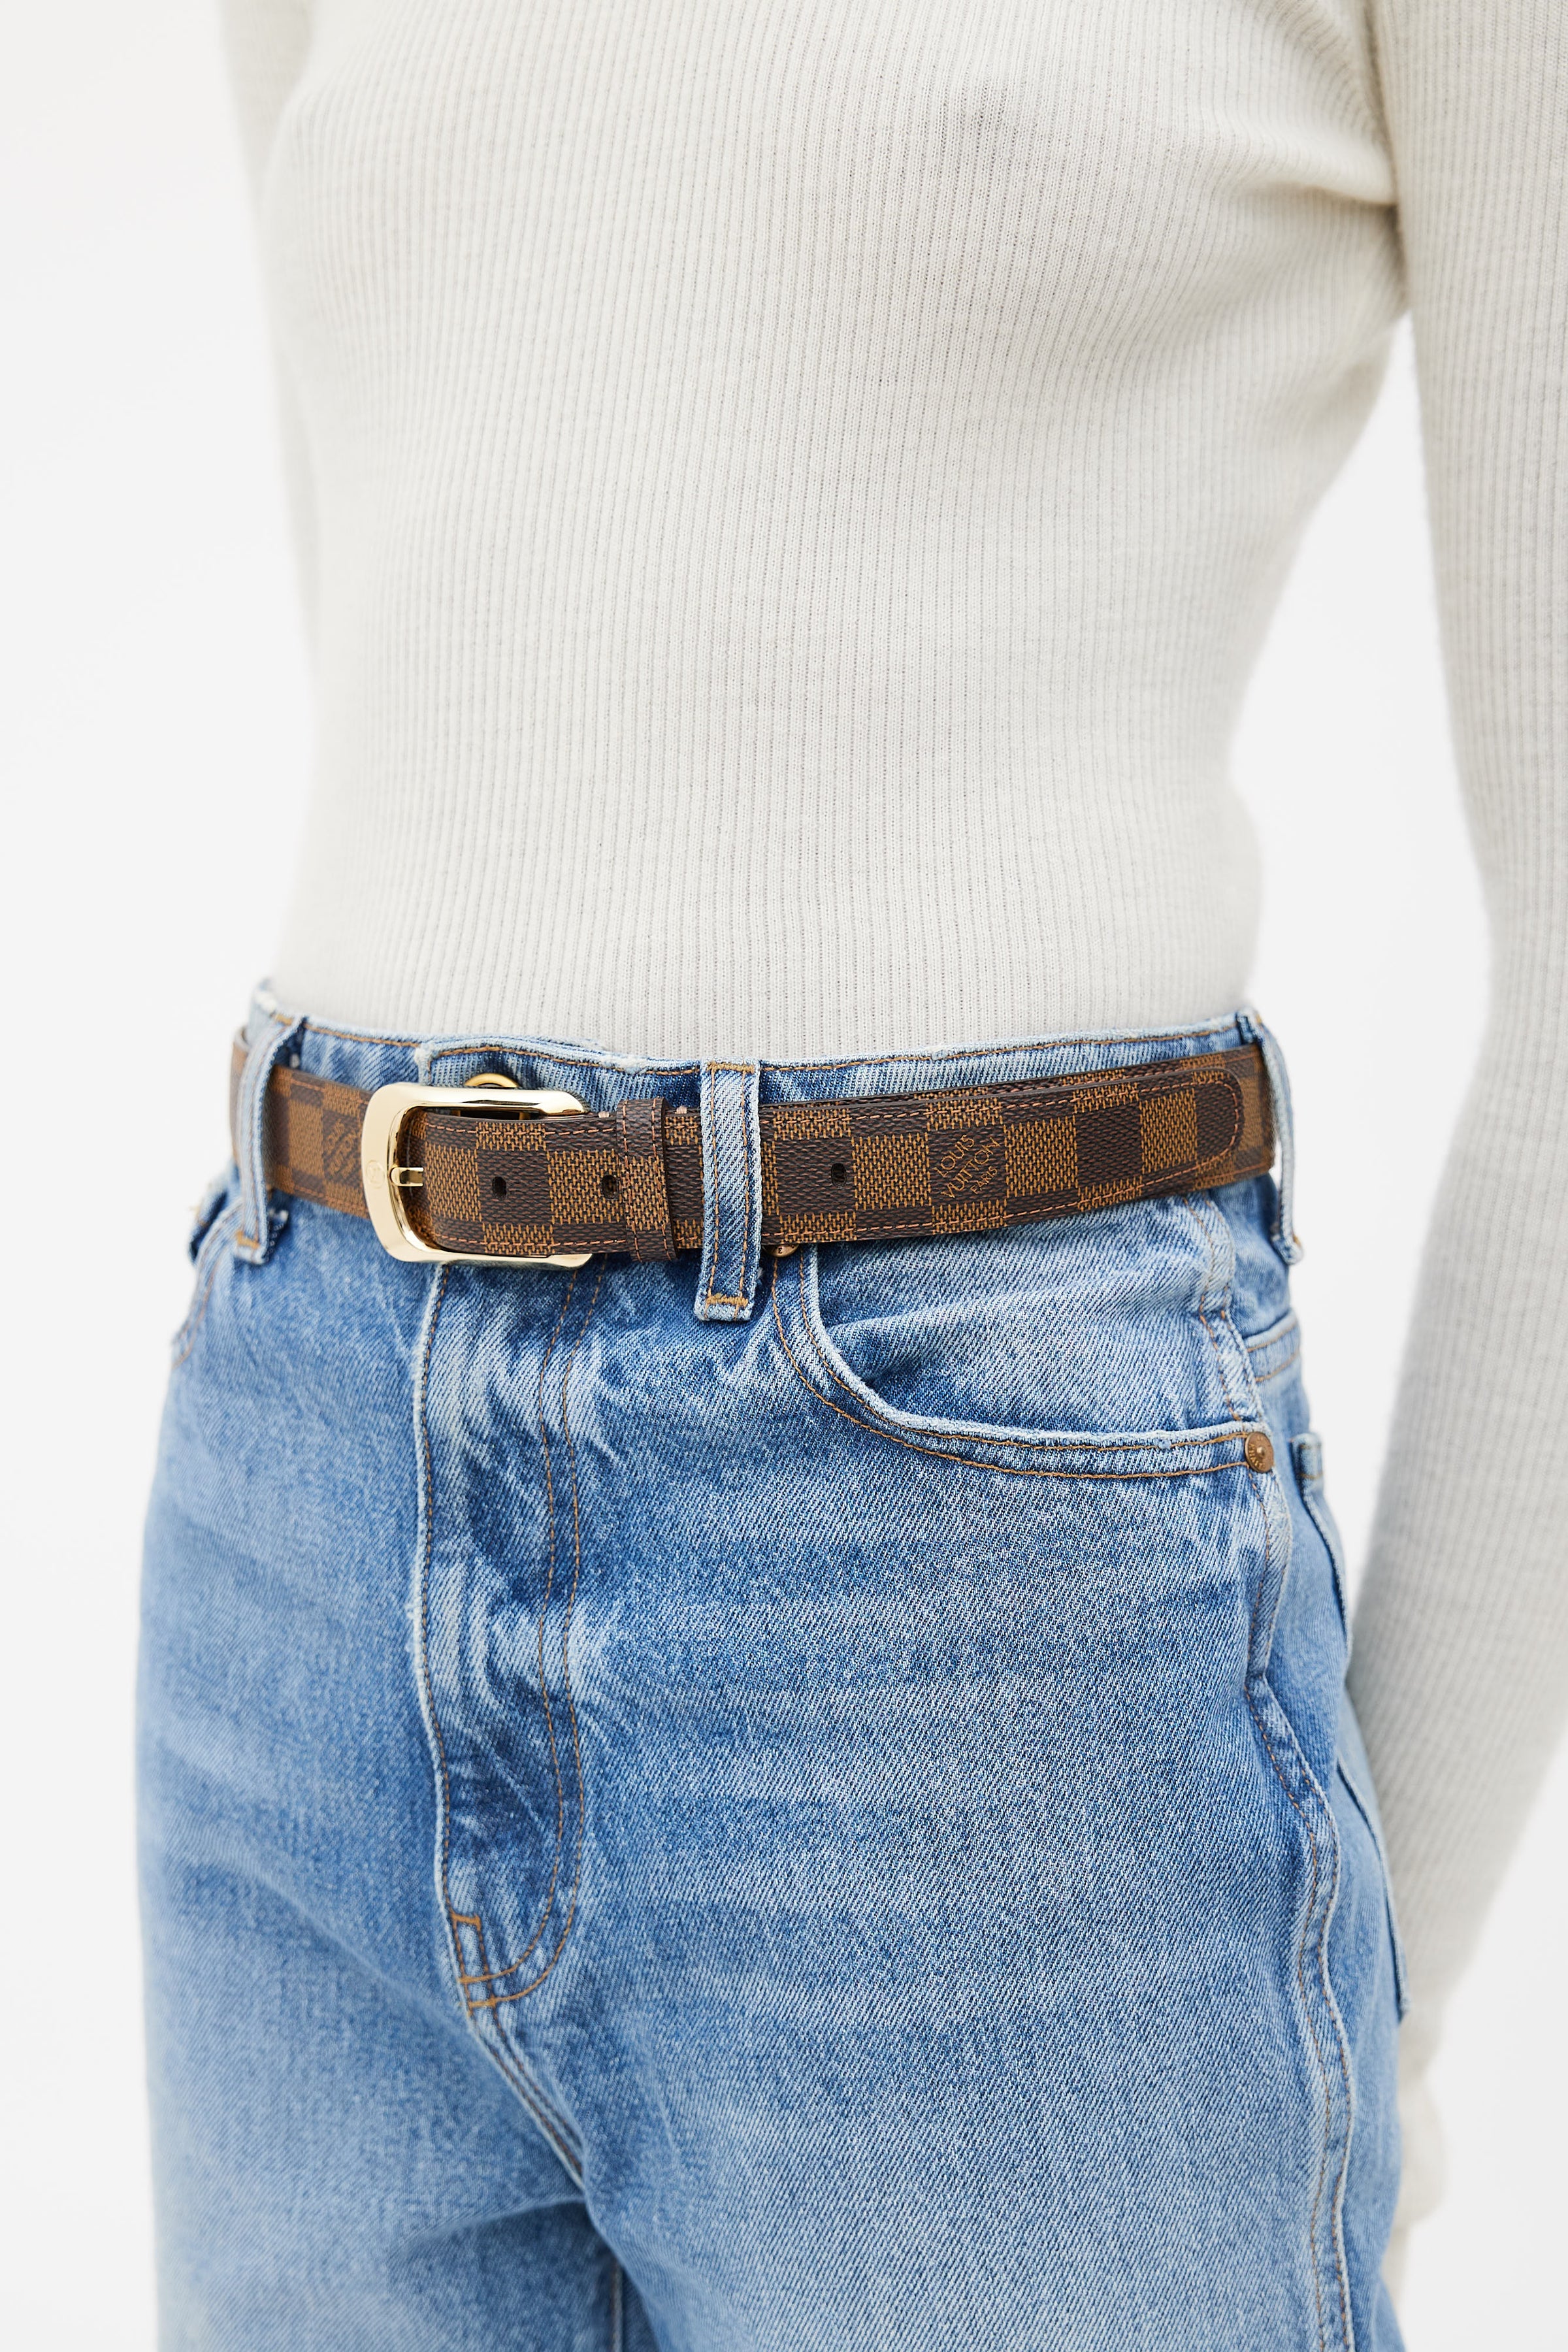 Louis Vuitton Belt Initiales Damier Ebene Canvas/Leather Brown in Canvas/ Leather with Mocha Brown - US